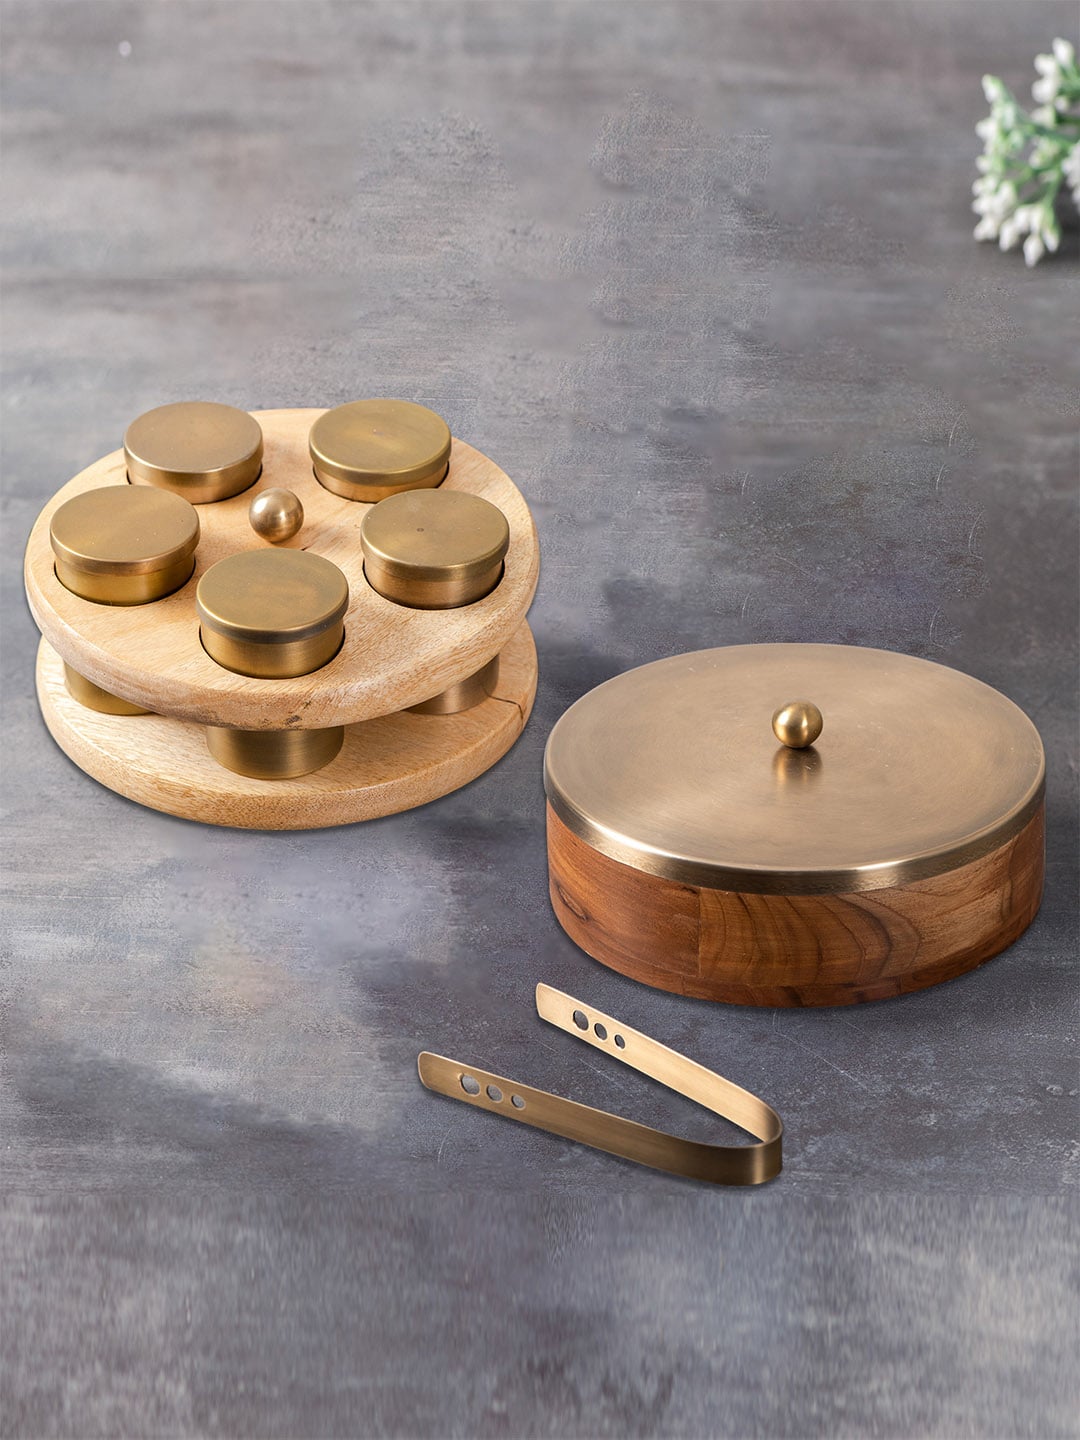 nestroots Brown & Gold-Toned Masala Box & Chapati Box Combo Set Price in India